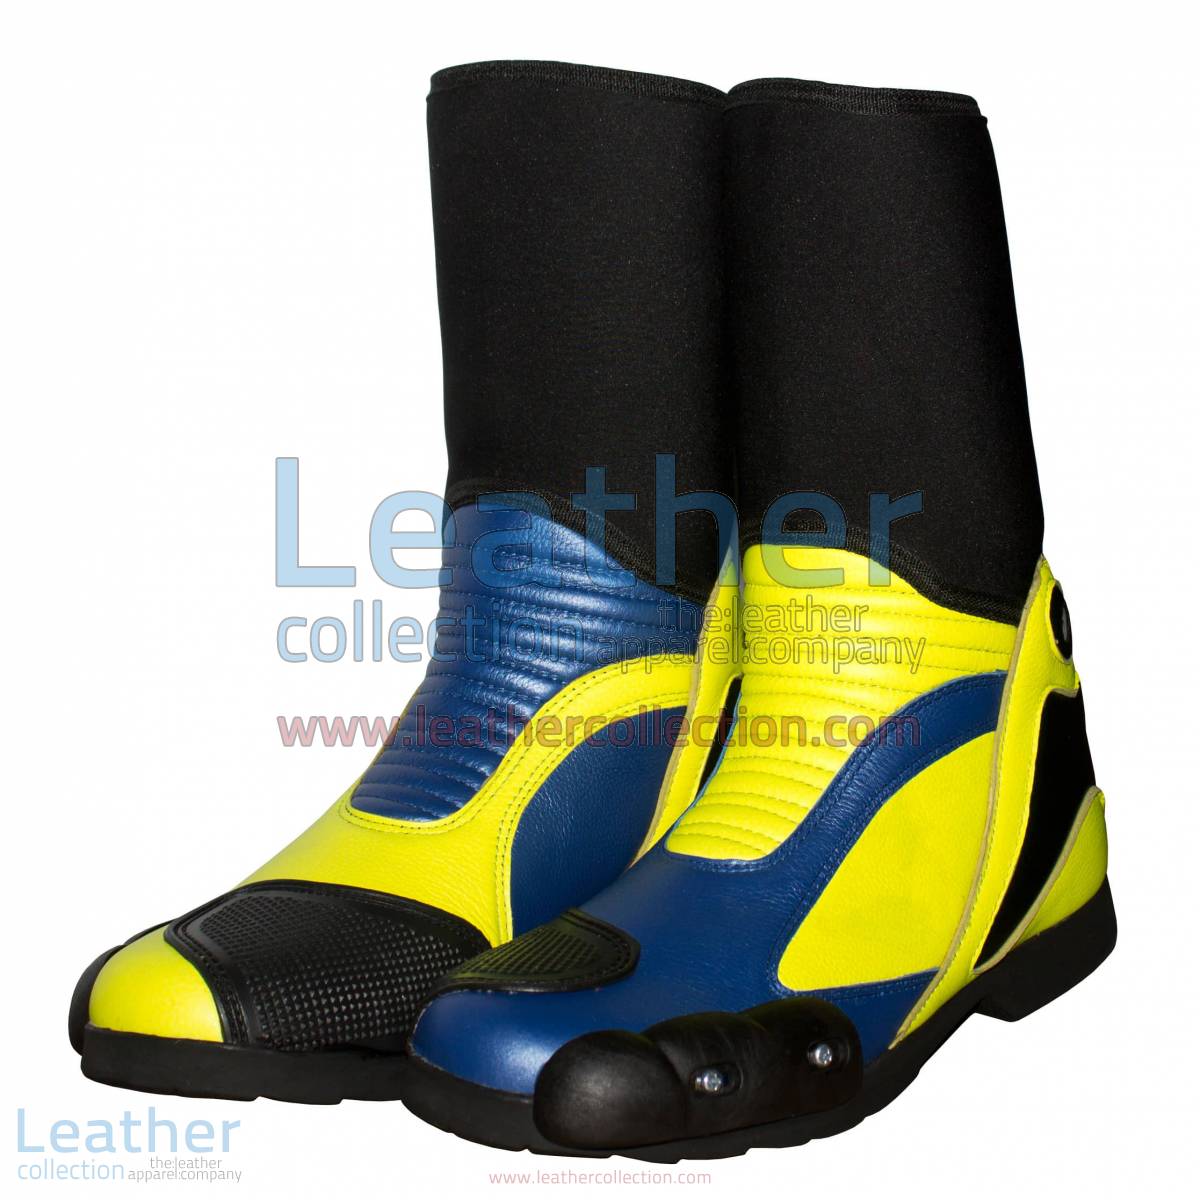 Valentino Rossi 2014 Motorcycle Race Boots | valentino rossi boots